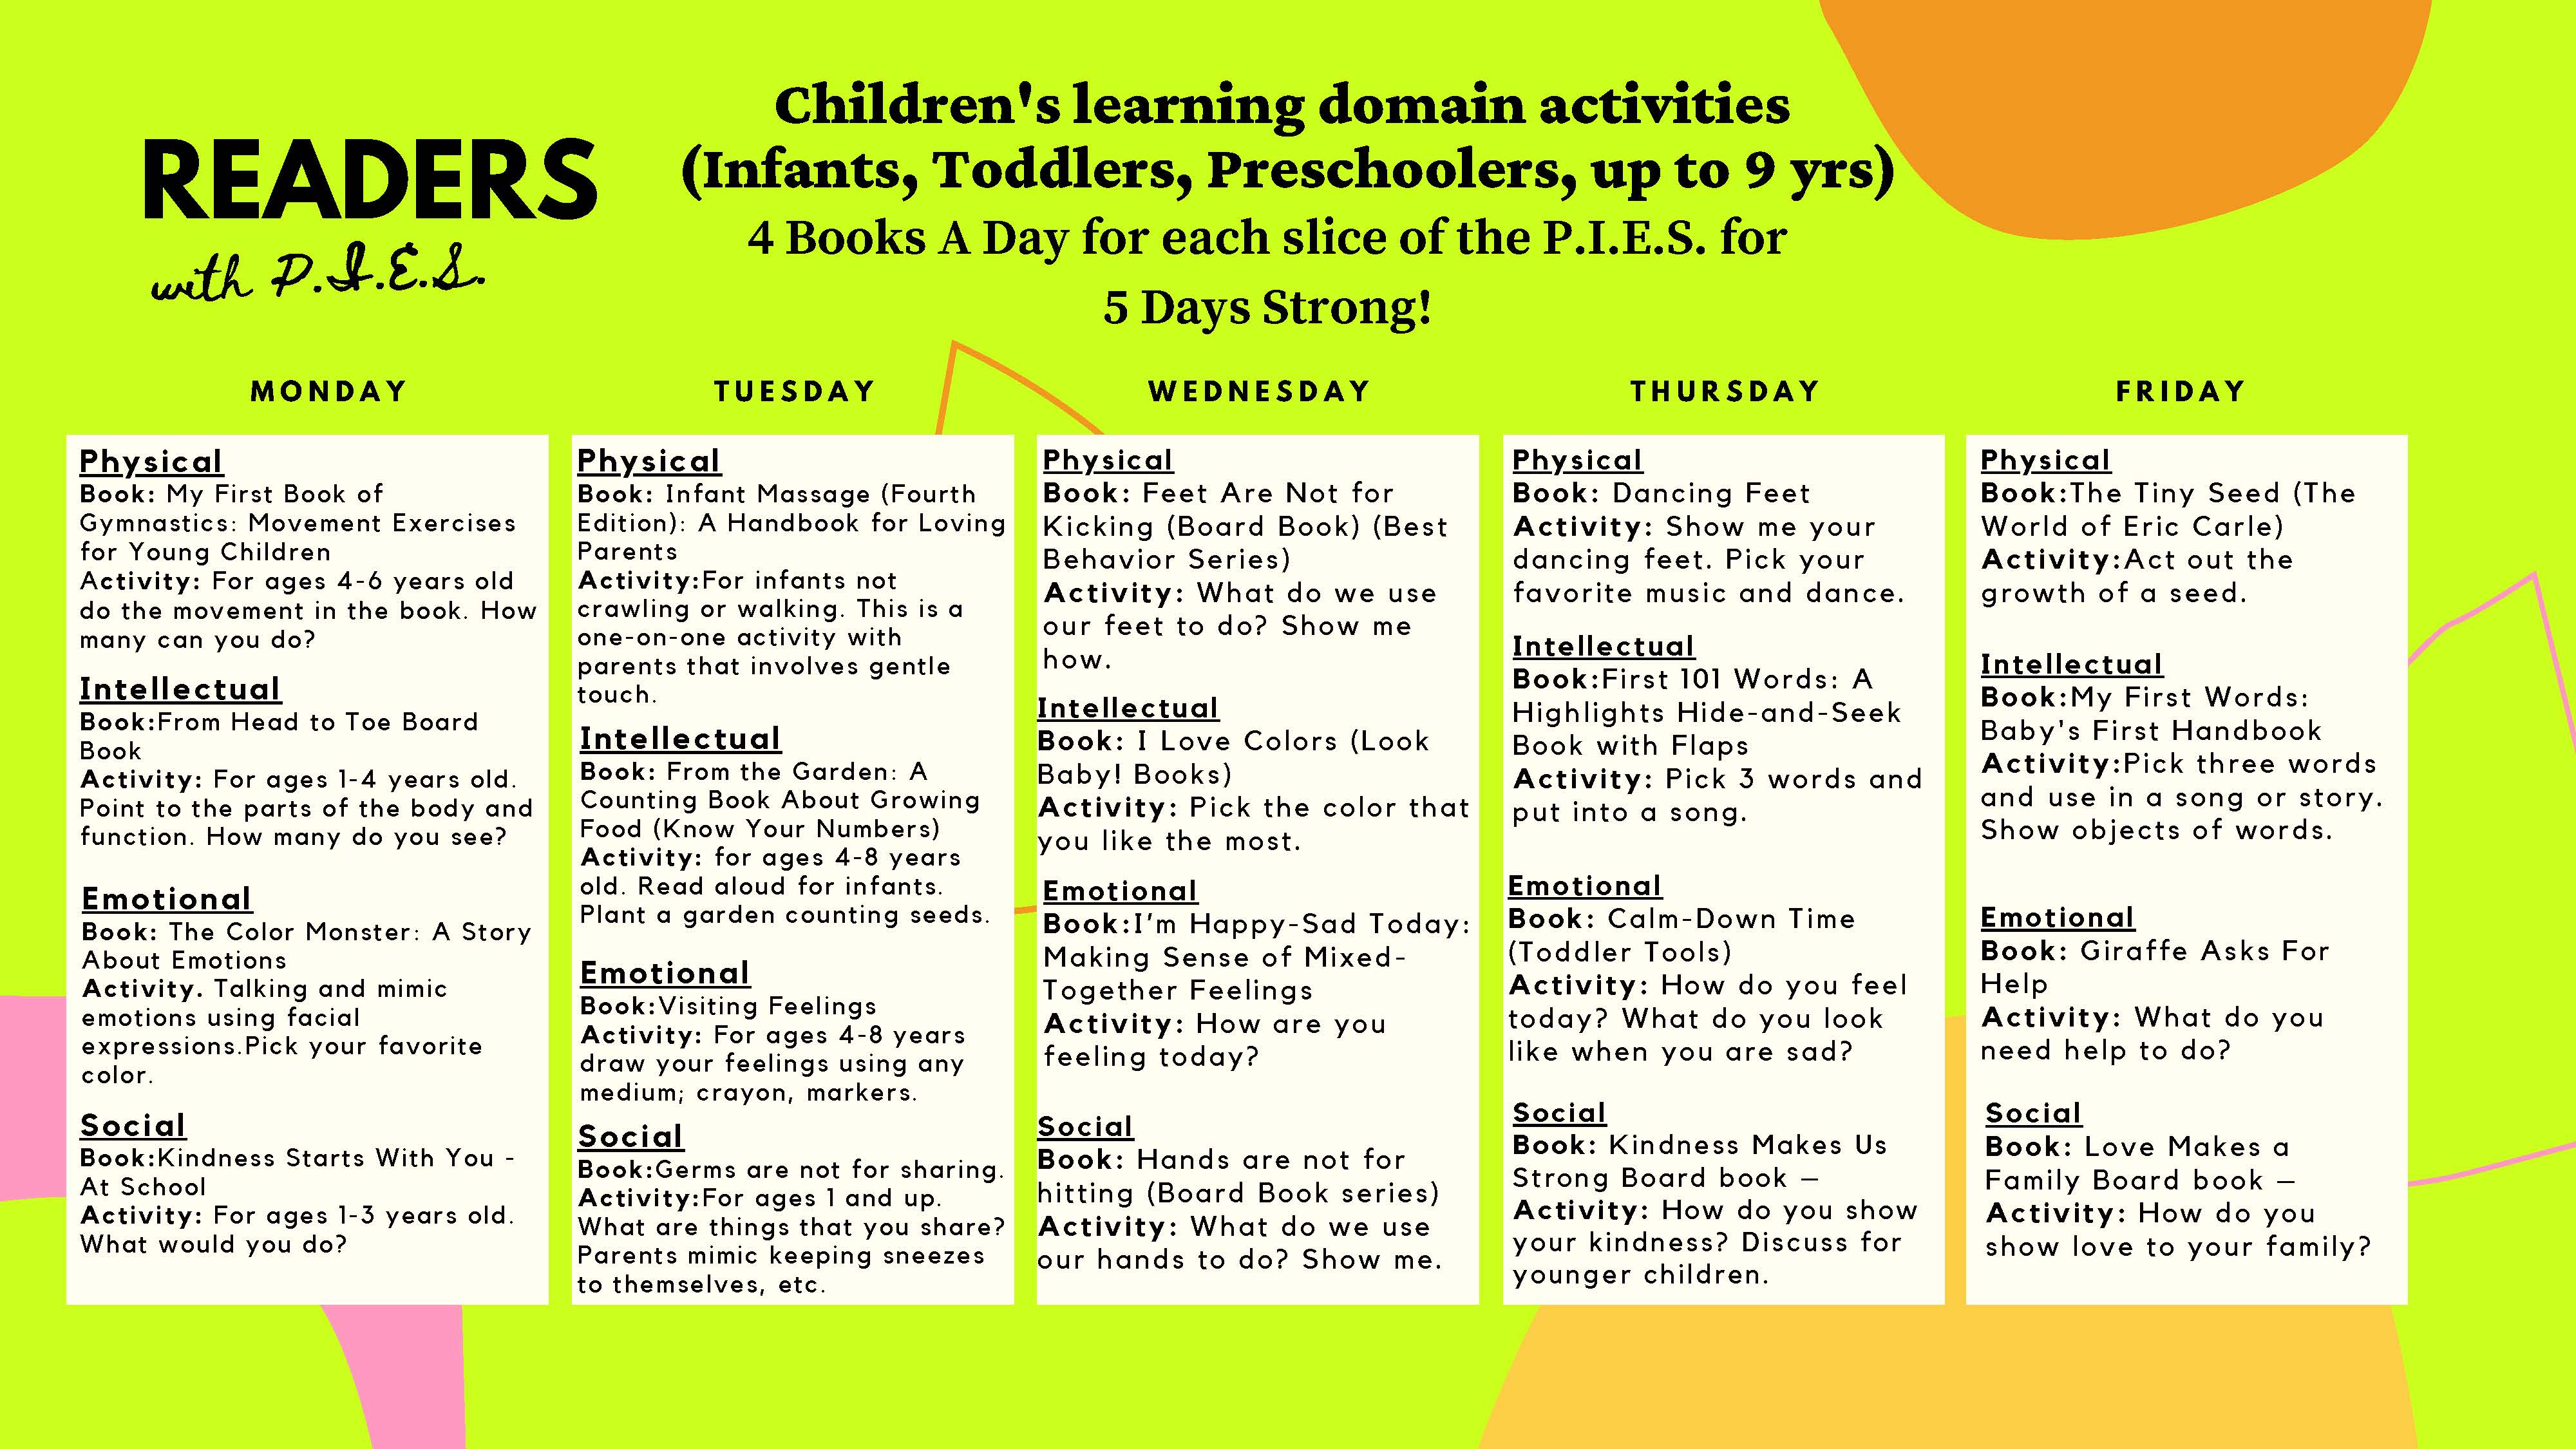 Calendar with suggested books and activities for children